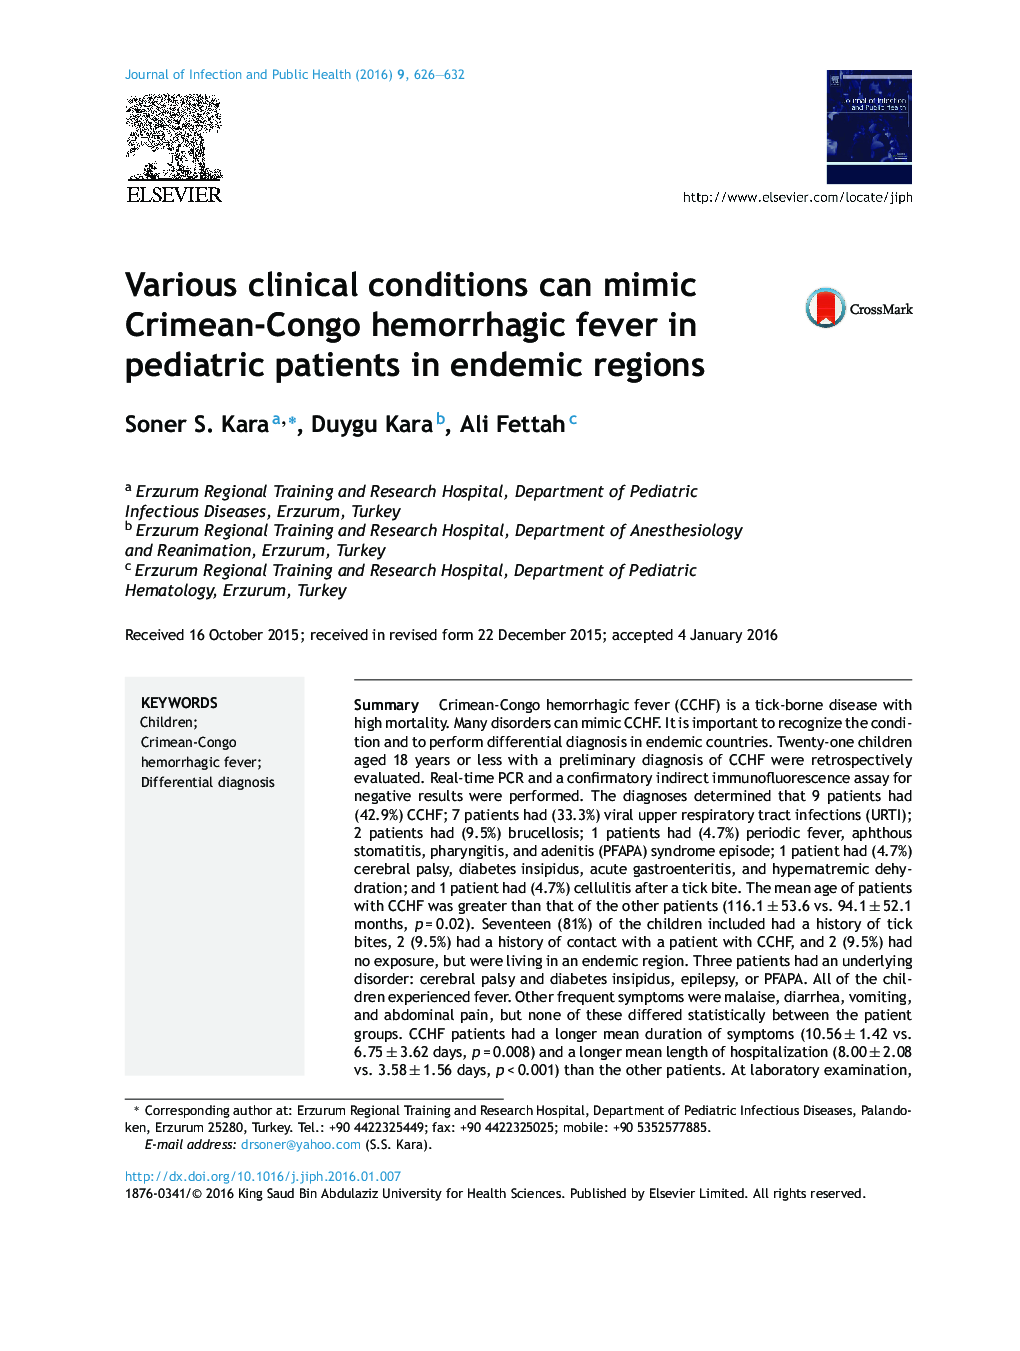 Various clinical conditions can mimic Crimean-Congo hemorrhagic fever in pediatric patients in endemic regions